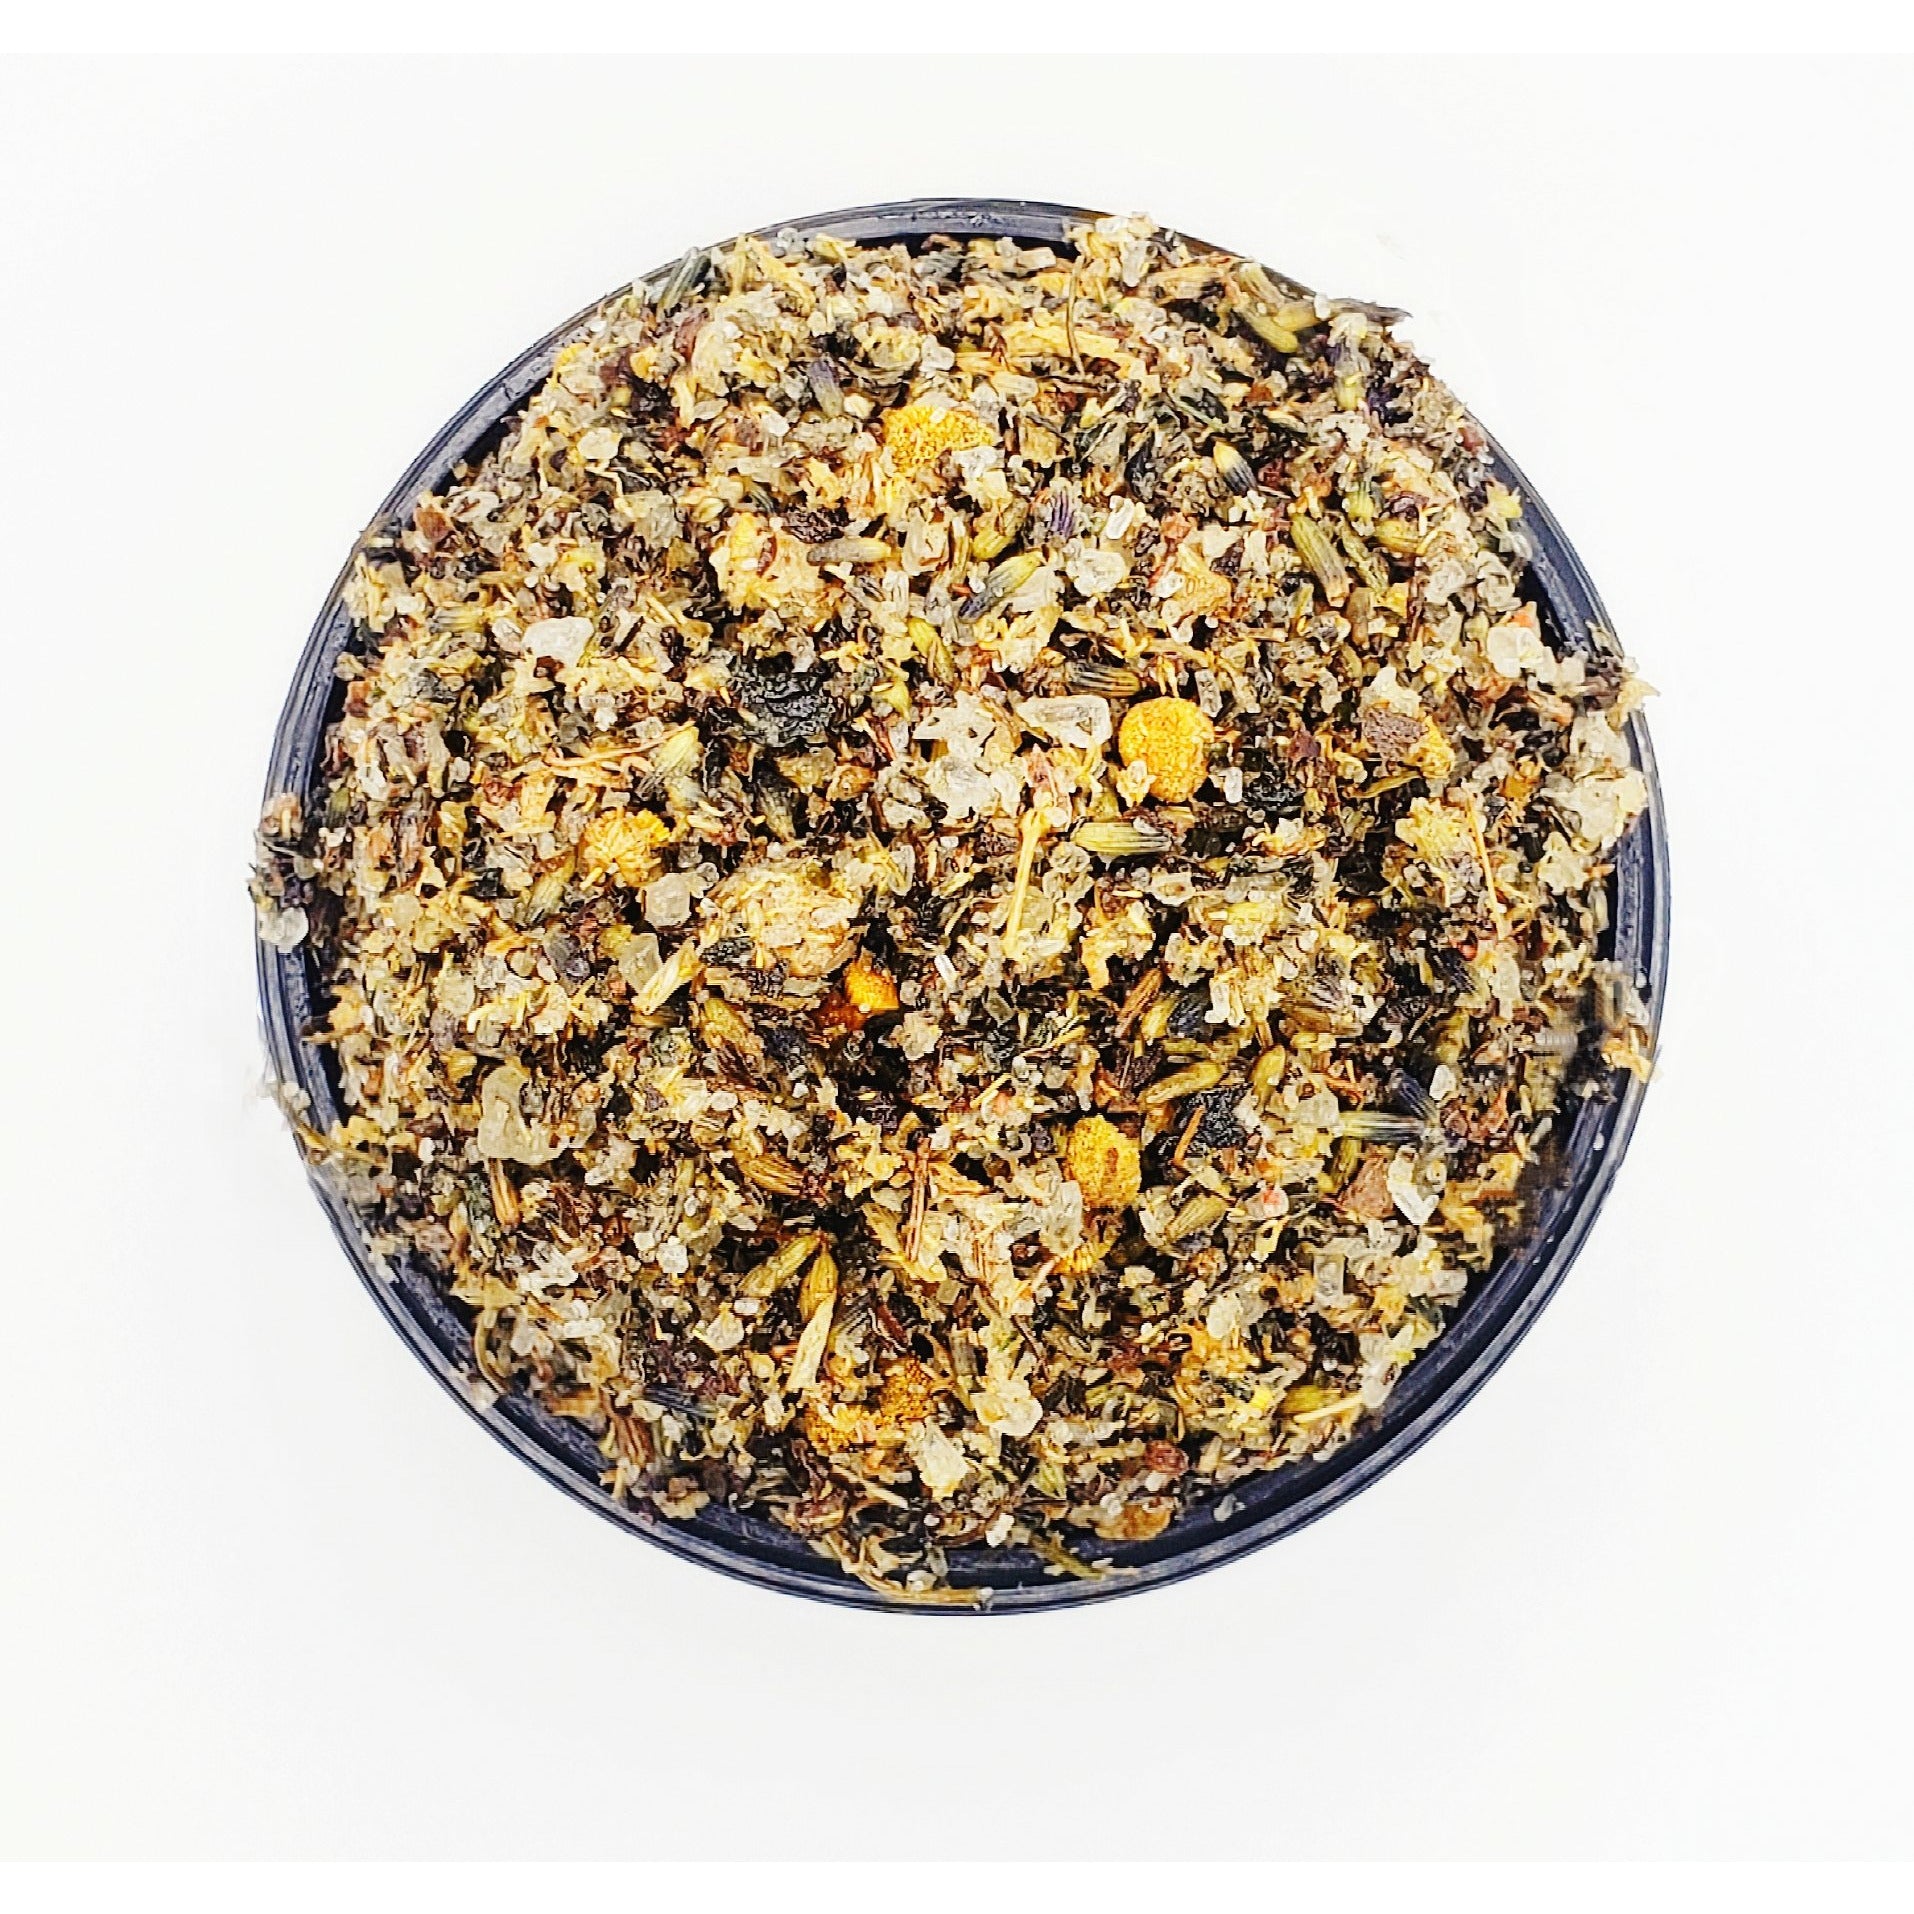 Meditate Soothing Bath Tea: Lavender & Chamomile Relaxation Blend